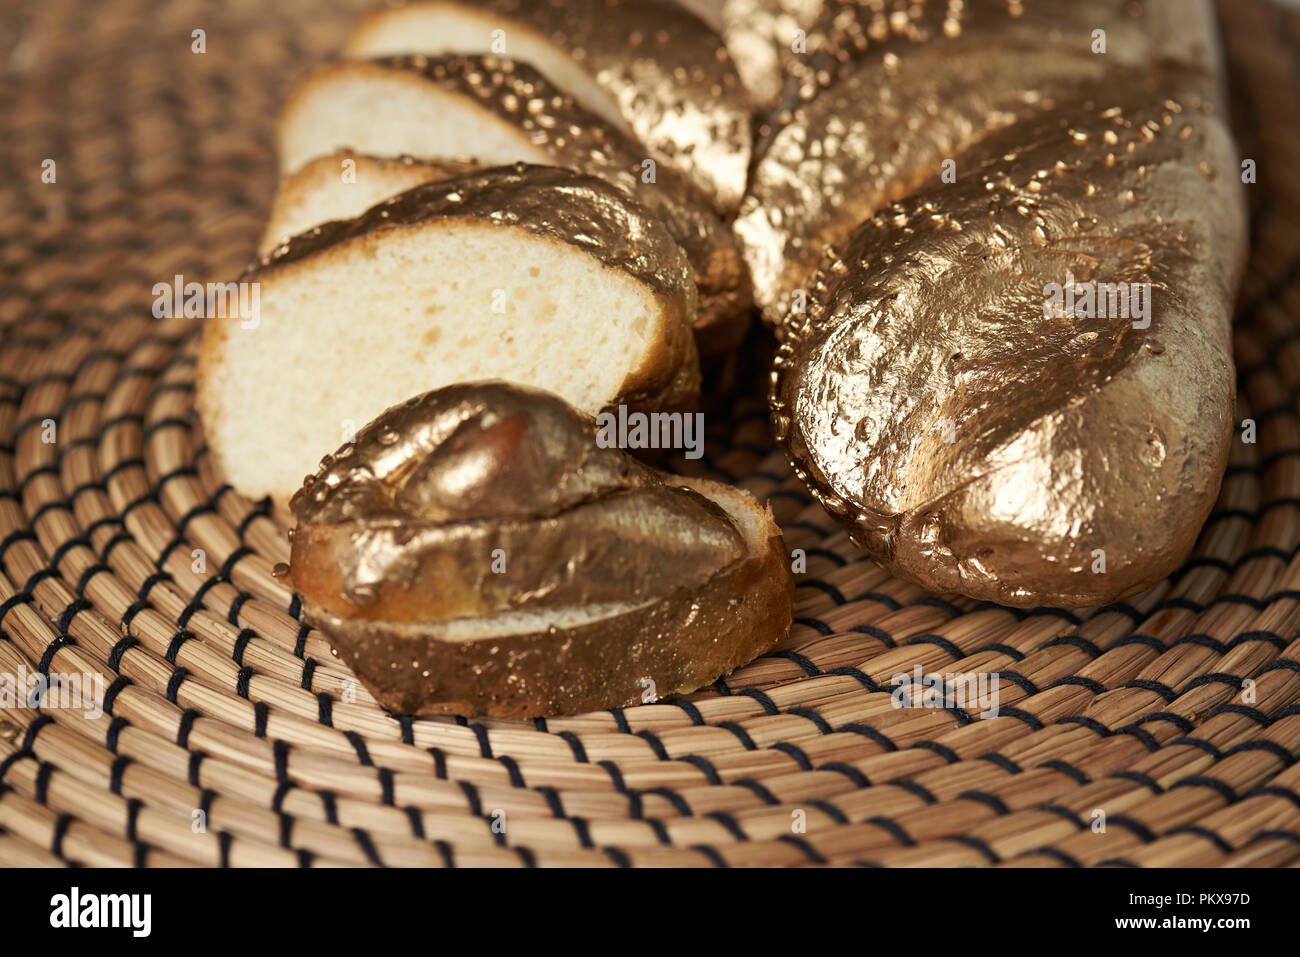 Cutted slices of golden bread laying on kitchen table close up Stock Photo